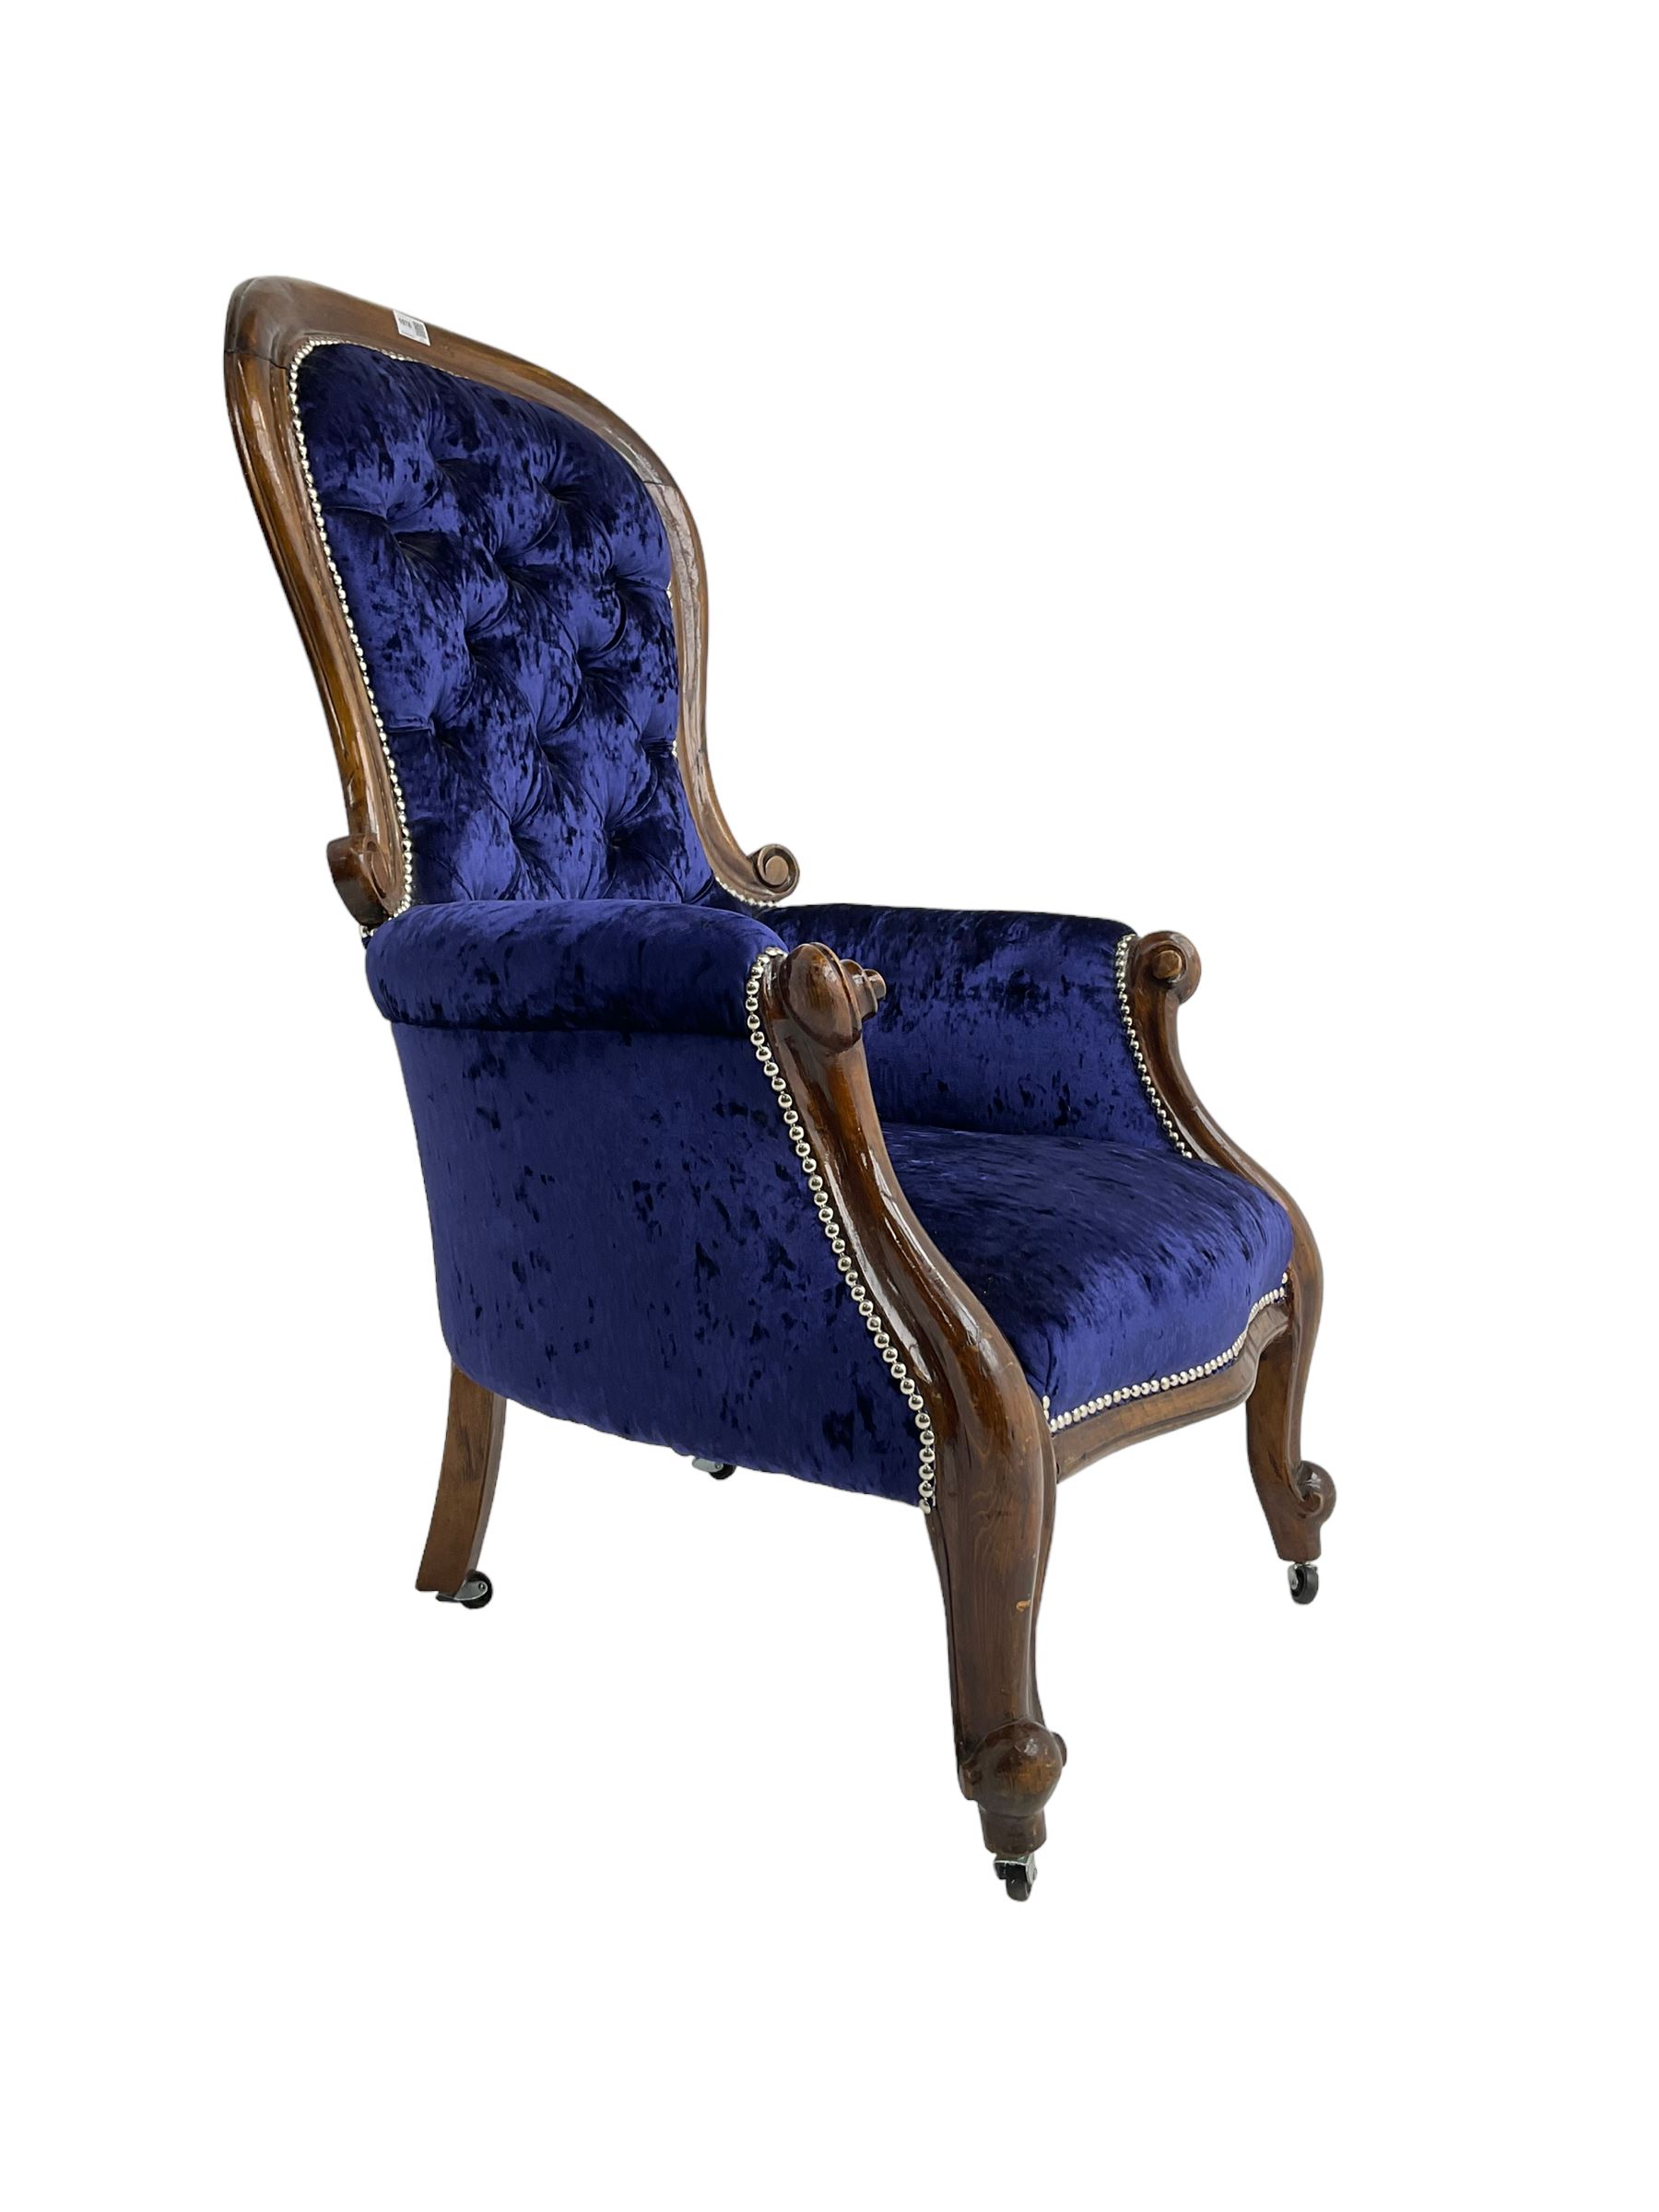 Victorian armchair - Image 5 of 6